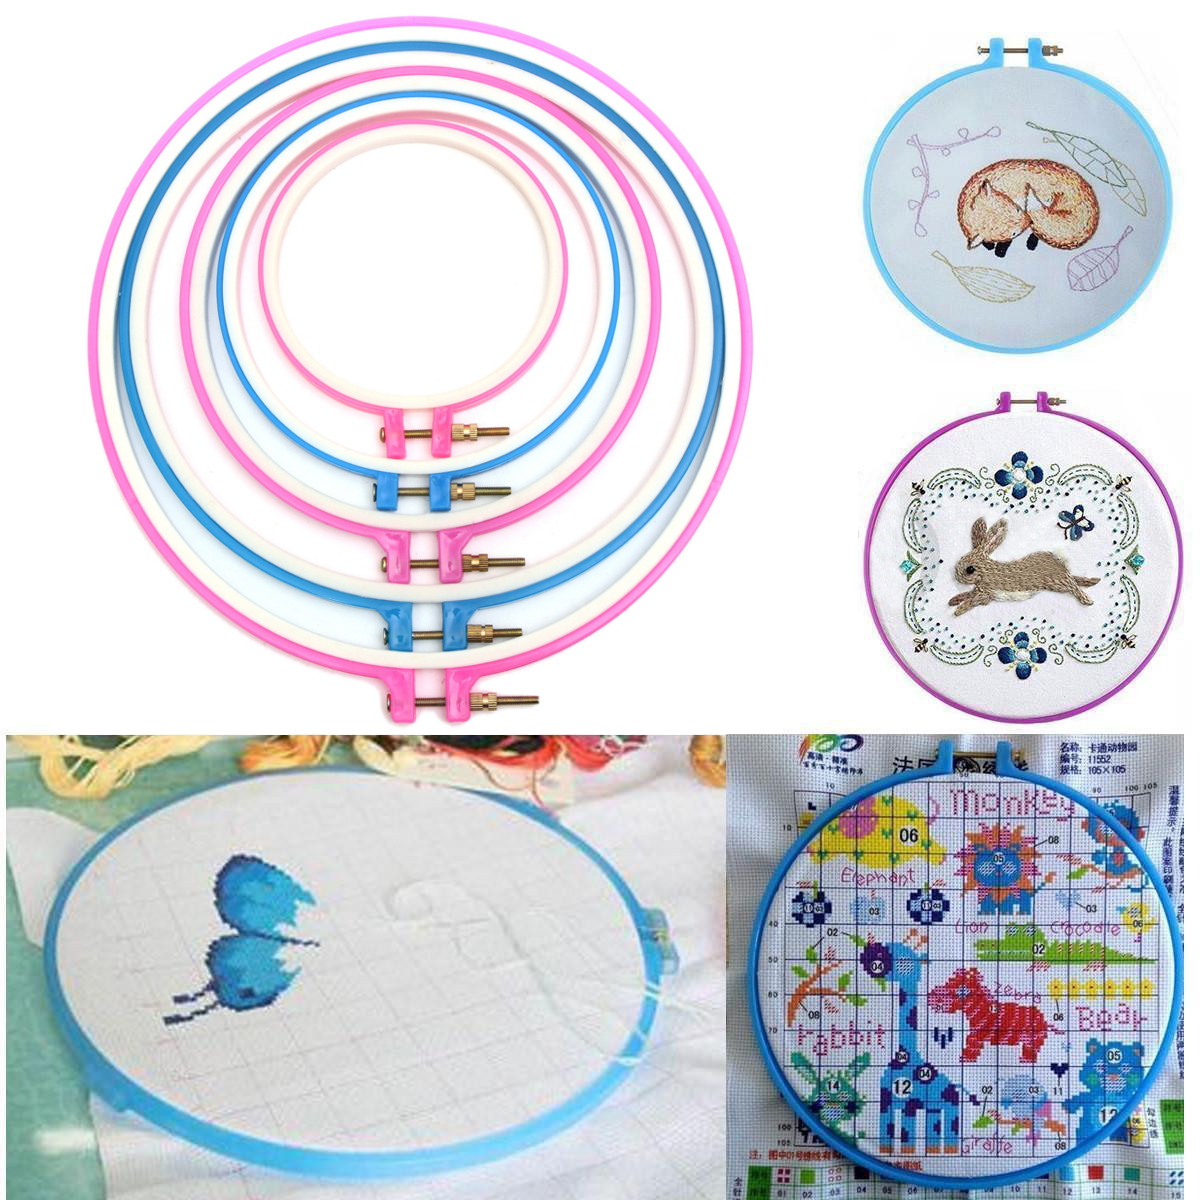 5 PCS Plastic Embroidery and Cross Stitch Hoop Set Adjustable Needlecraft Sewing Tools